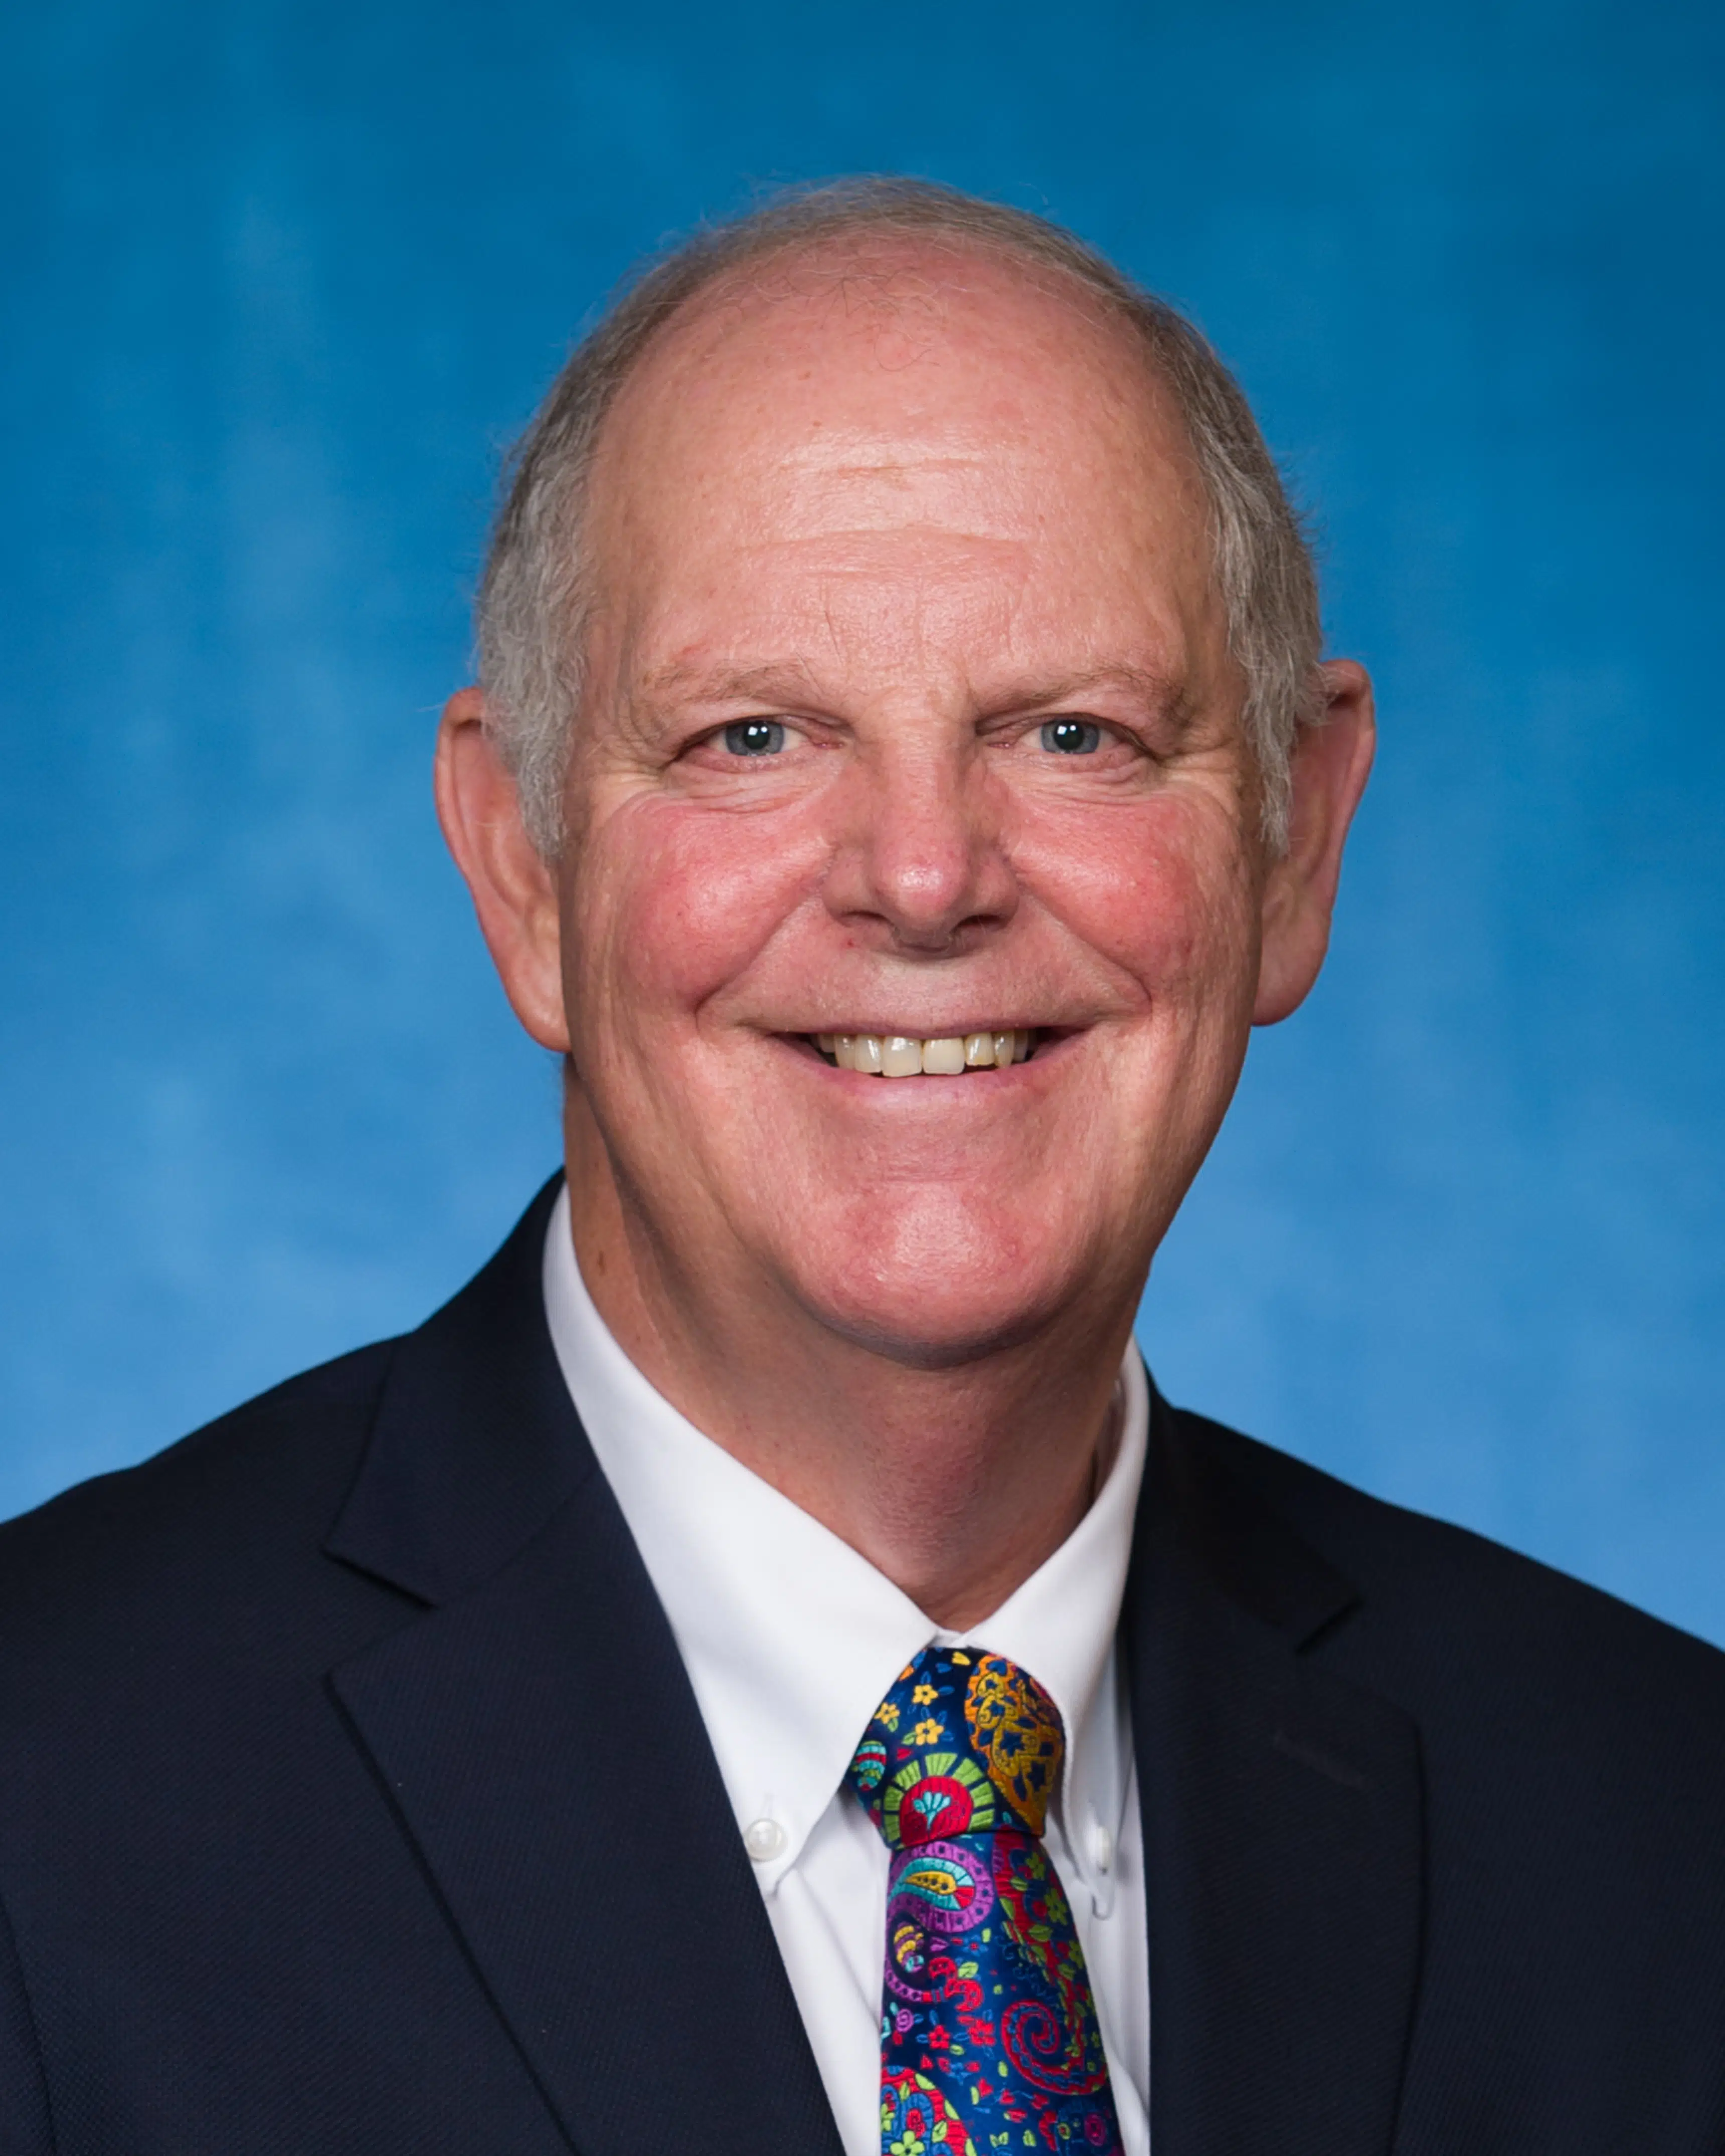 O’Halleran Leads Package of Bills Targeting Ethics, Transparency in Congress 